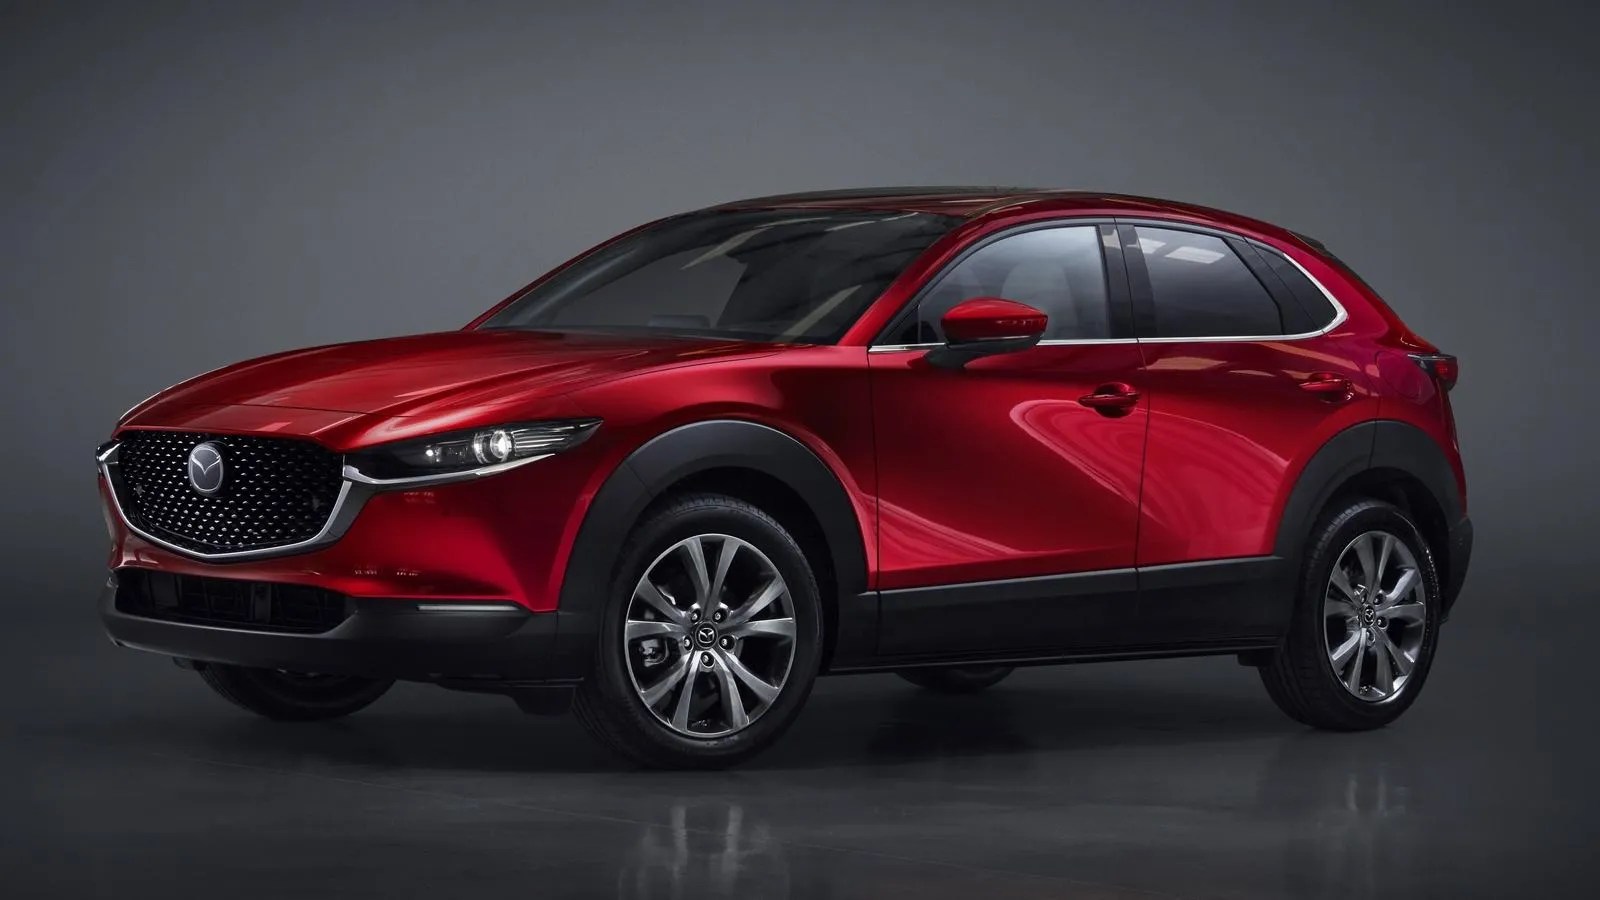 The front seats are comfy and supportive, and the driving position is excellent, thanks in part to the wide. 2019 Mazda CX-30 Broadens Mazda's Crossover Range | Top Speed